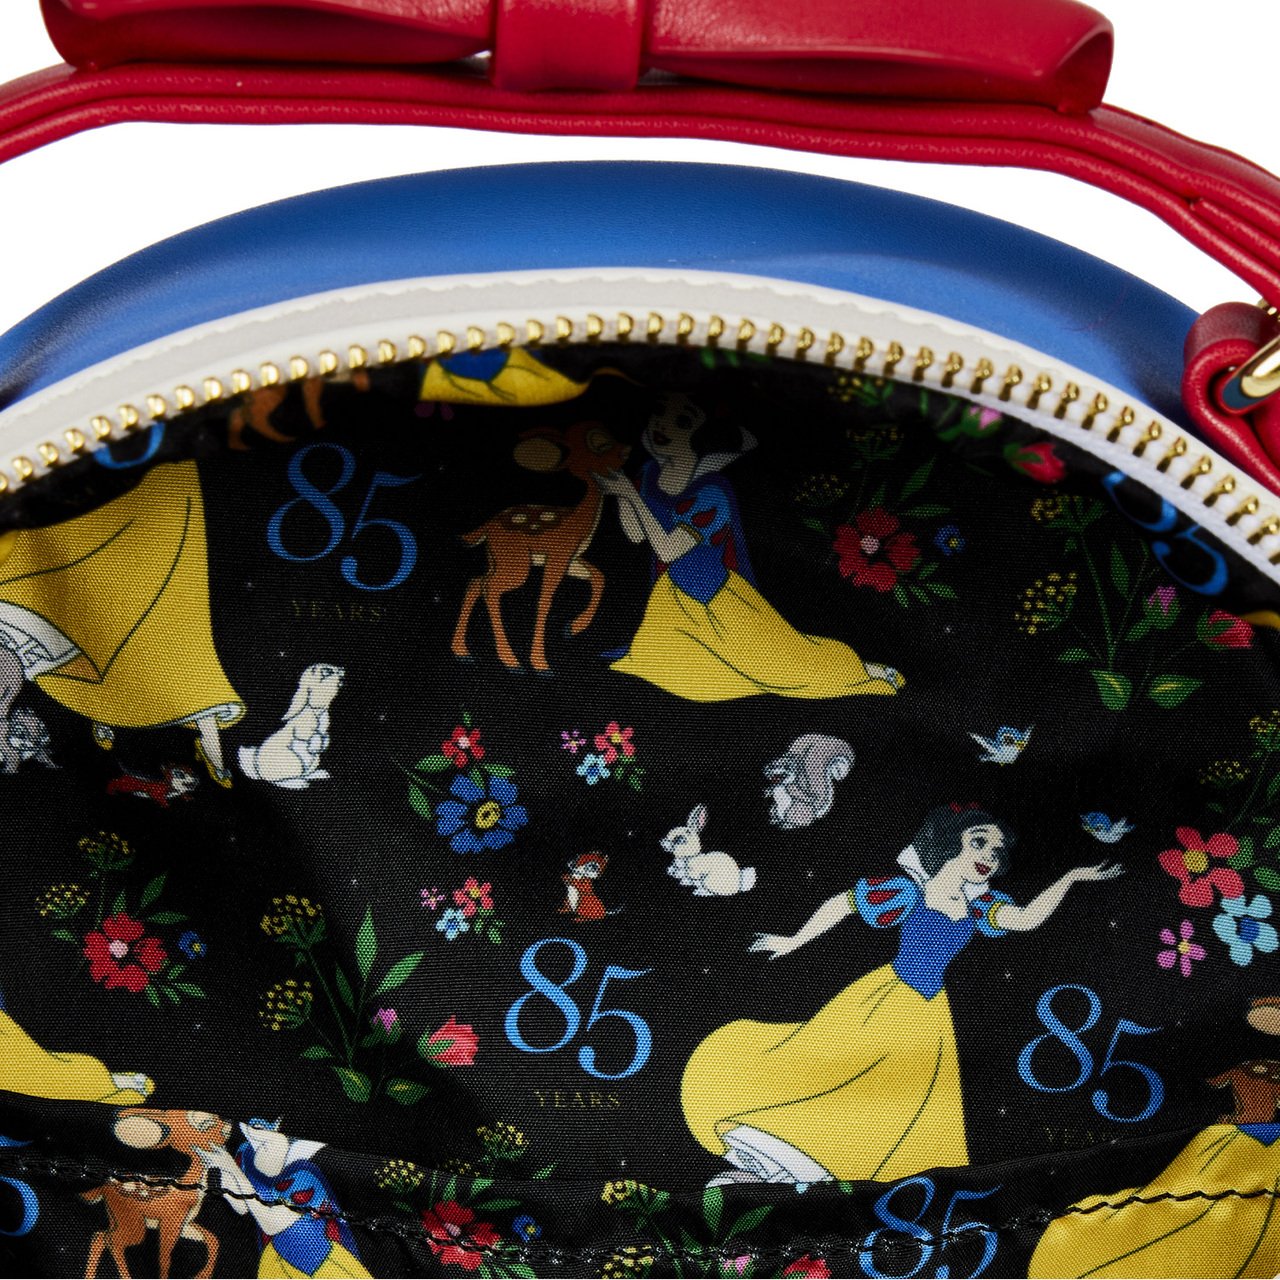 Loungefly x Disney Snow White Bow Handle Mini Backpack